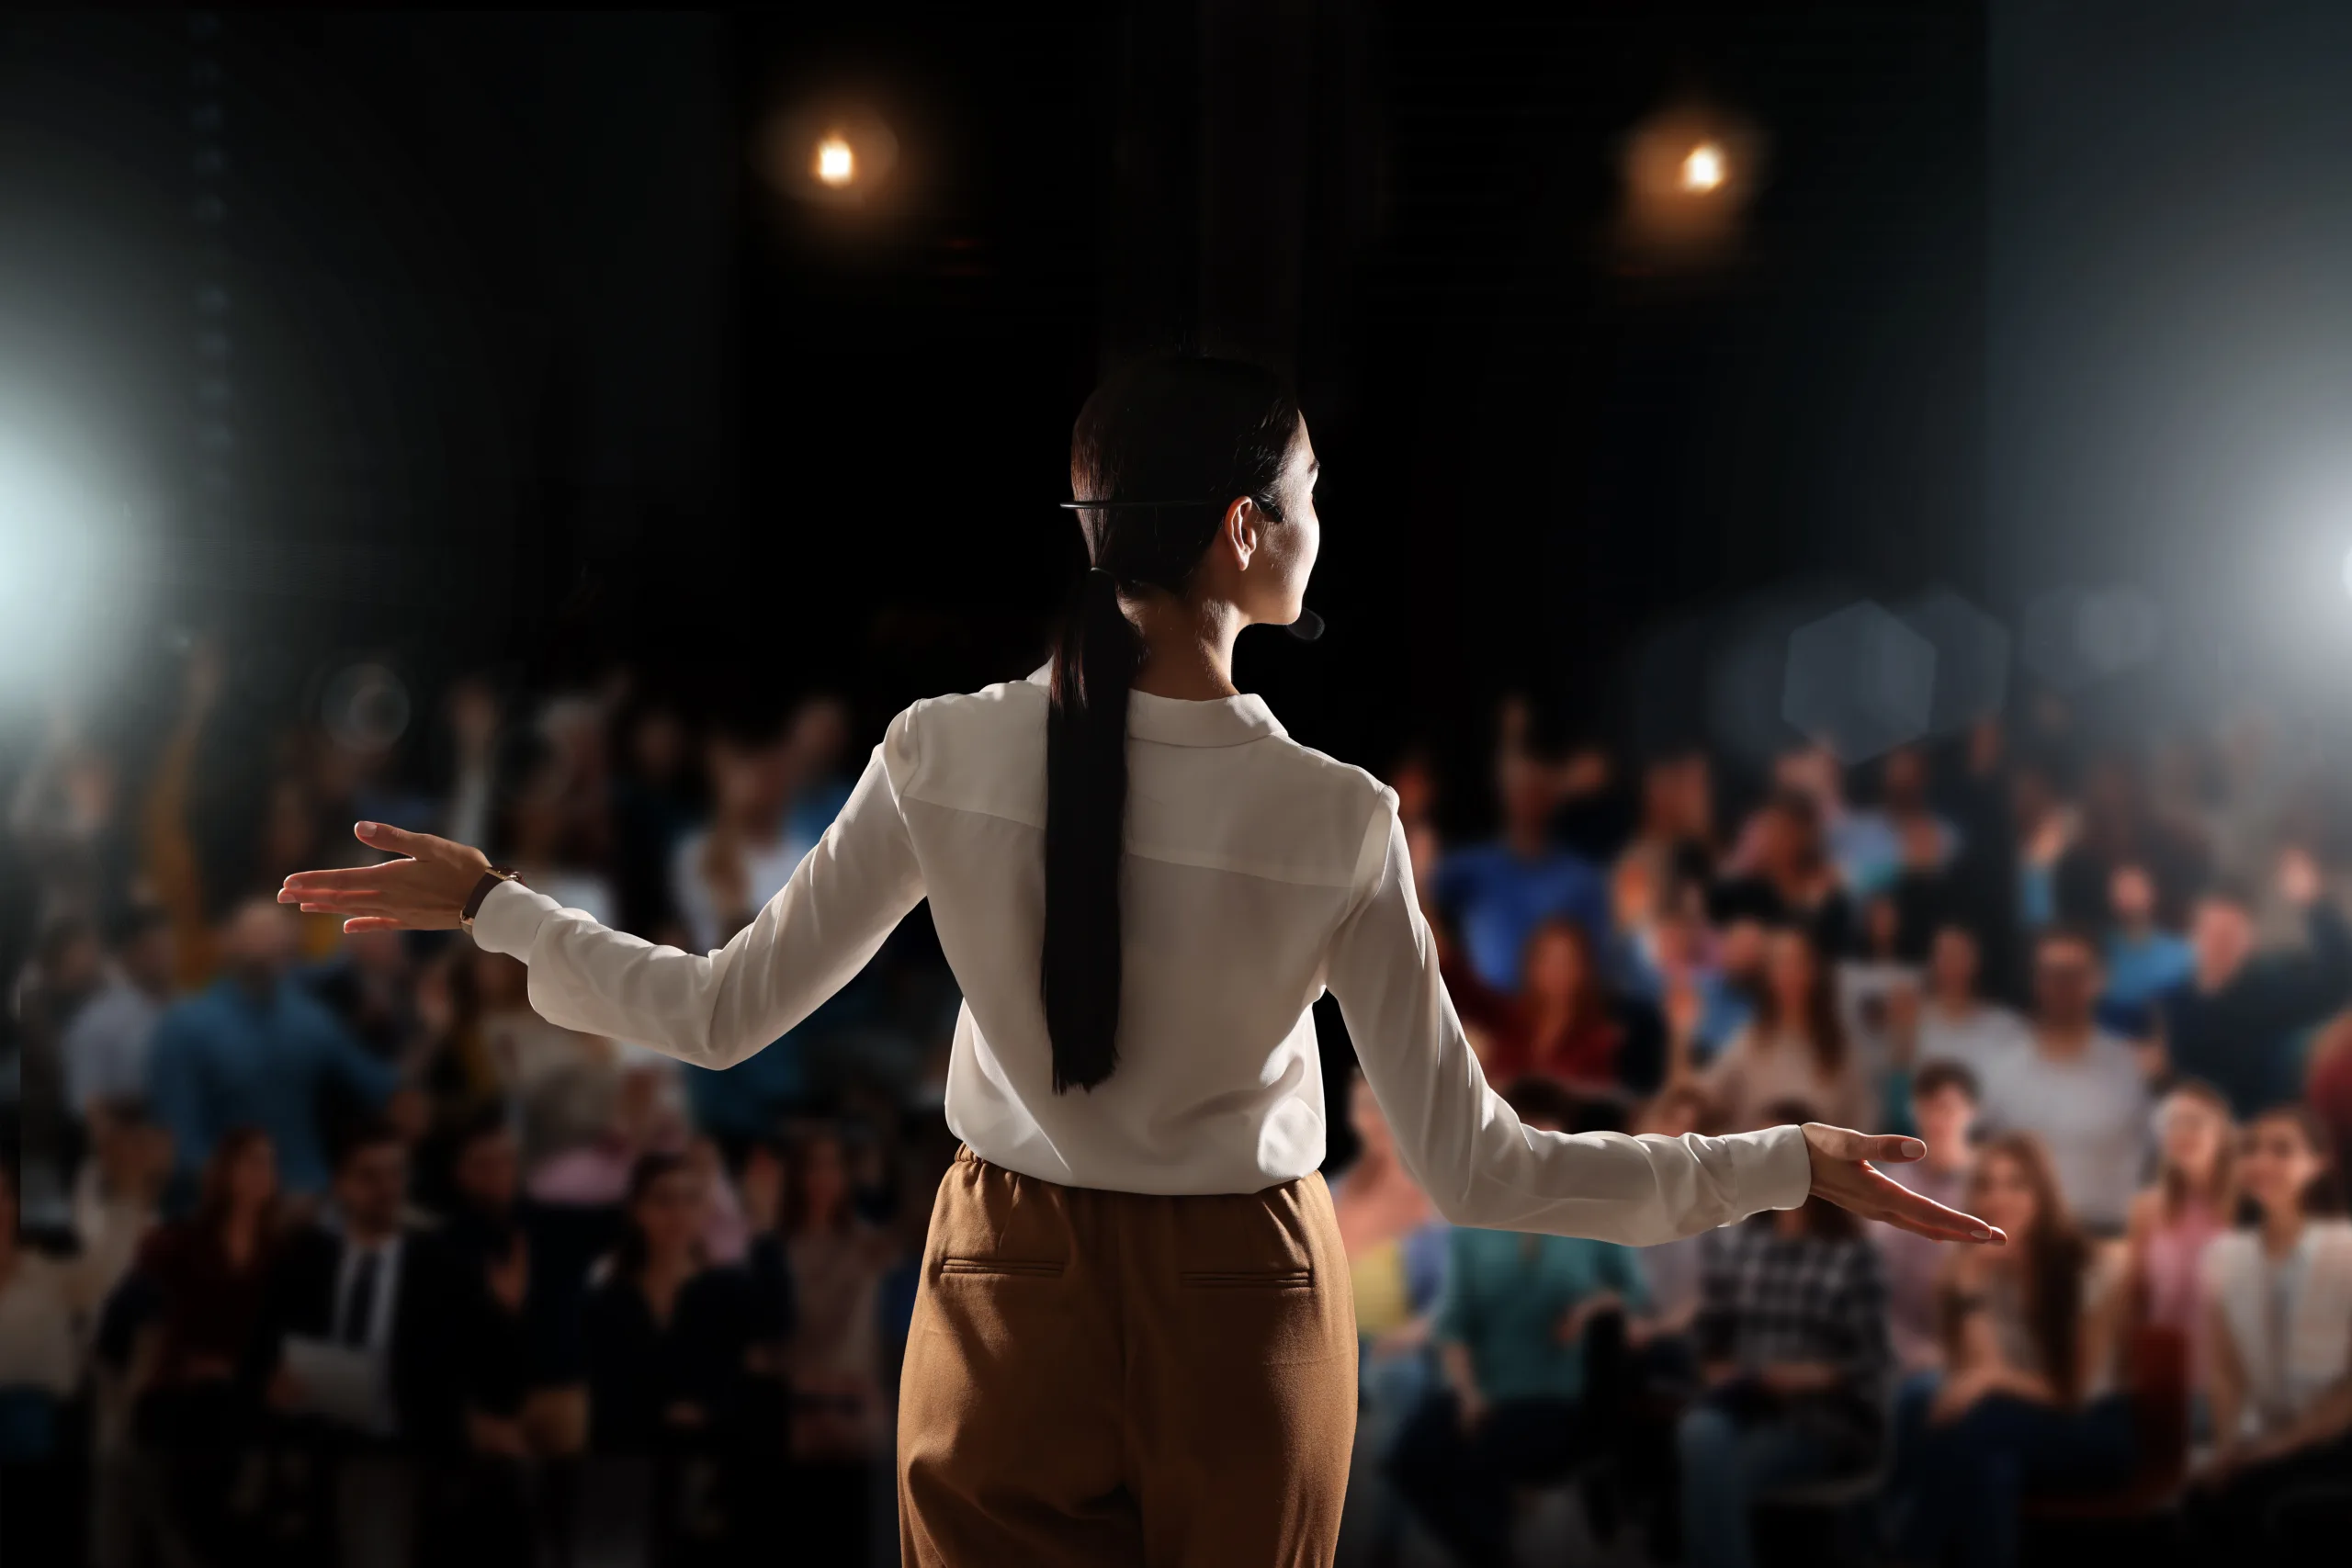 Top 5 Public Speaking Tips to Help You Shine on Stage